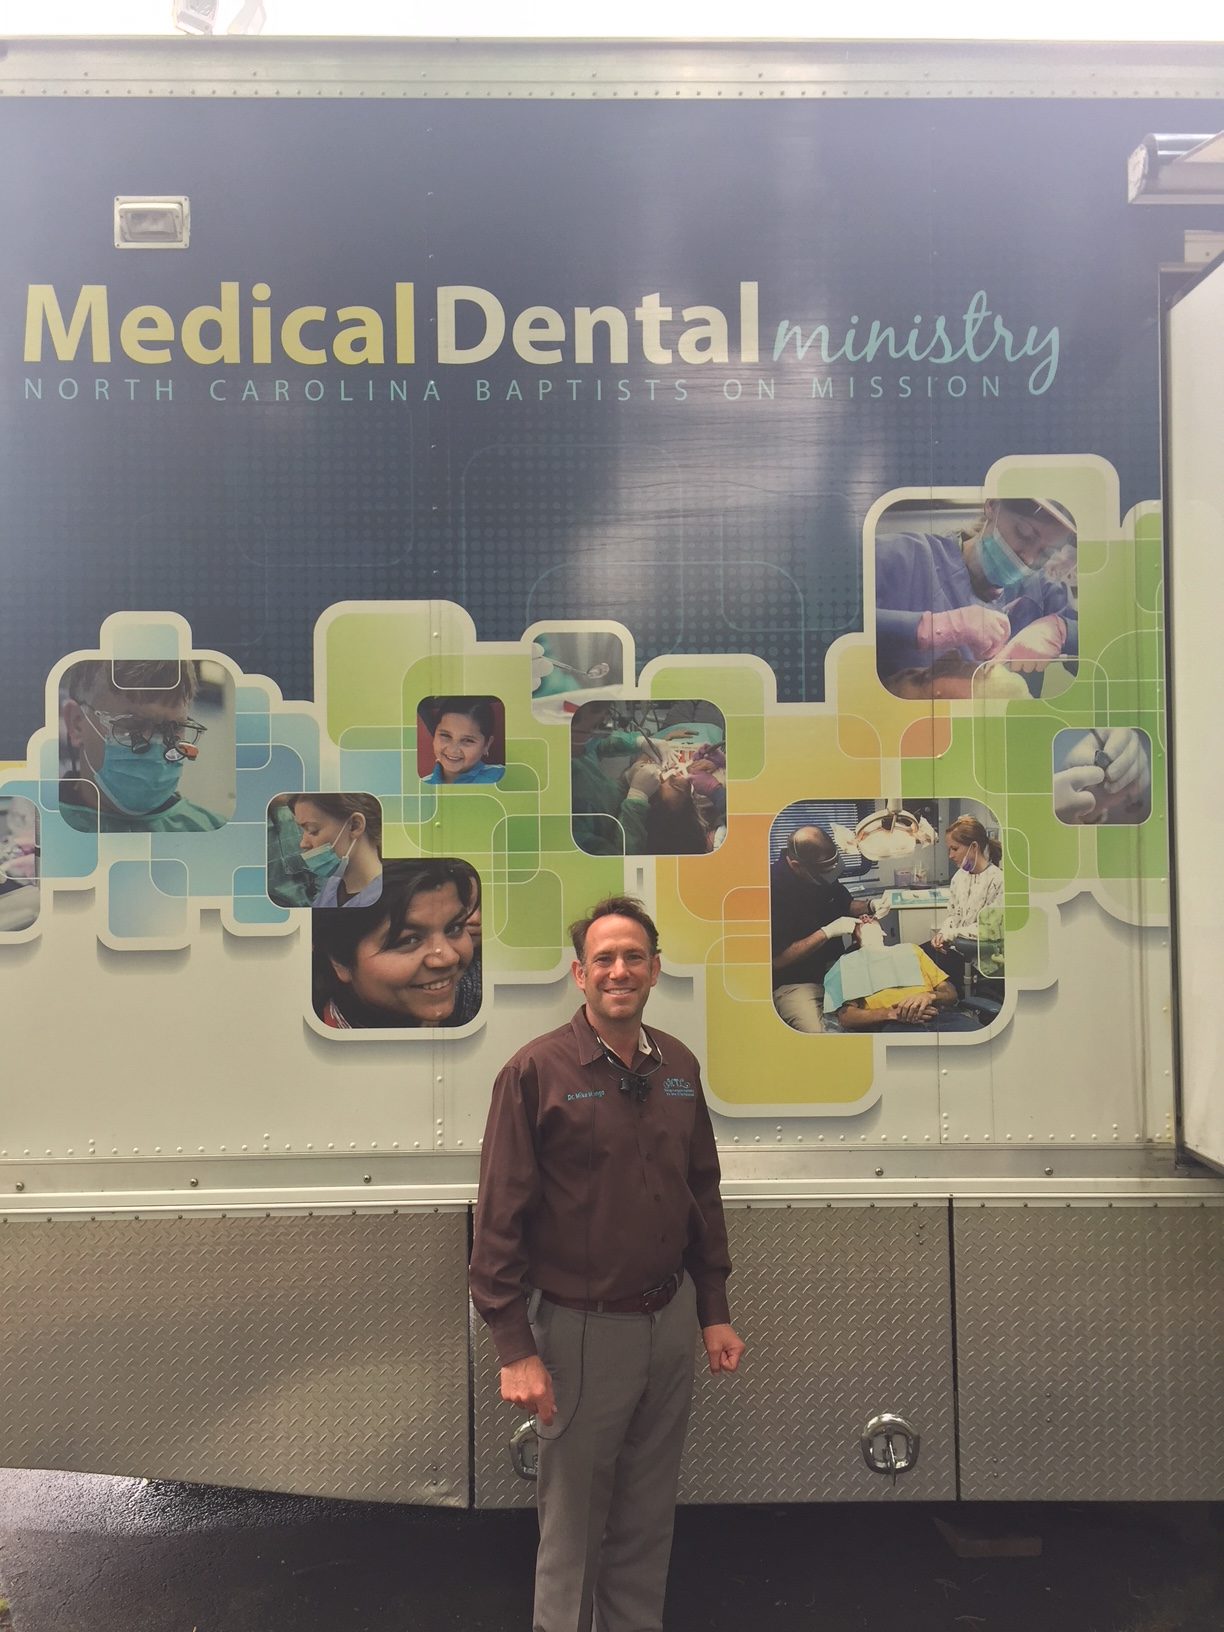 Dr. Mike Mango provides dental care for impoverished neighborhood in Greensboro, NC